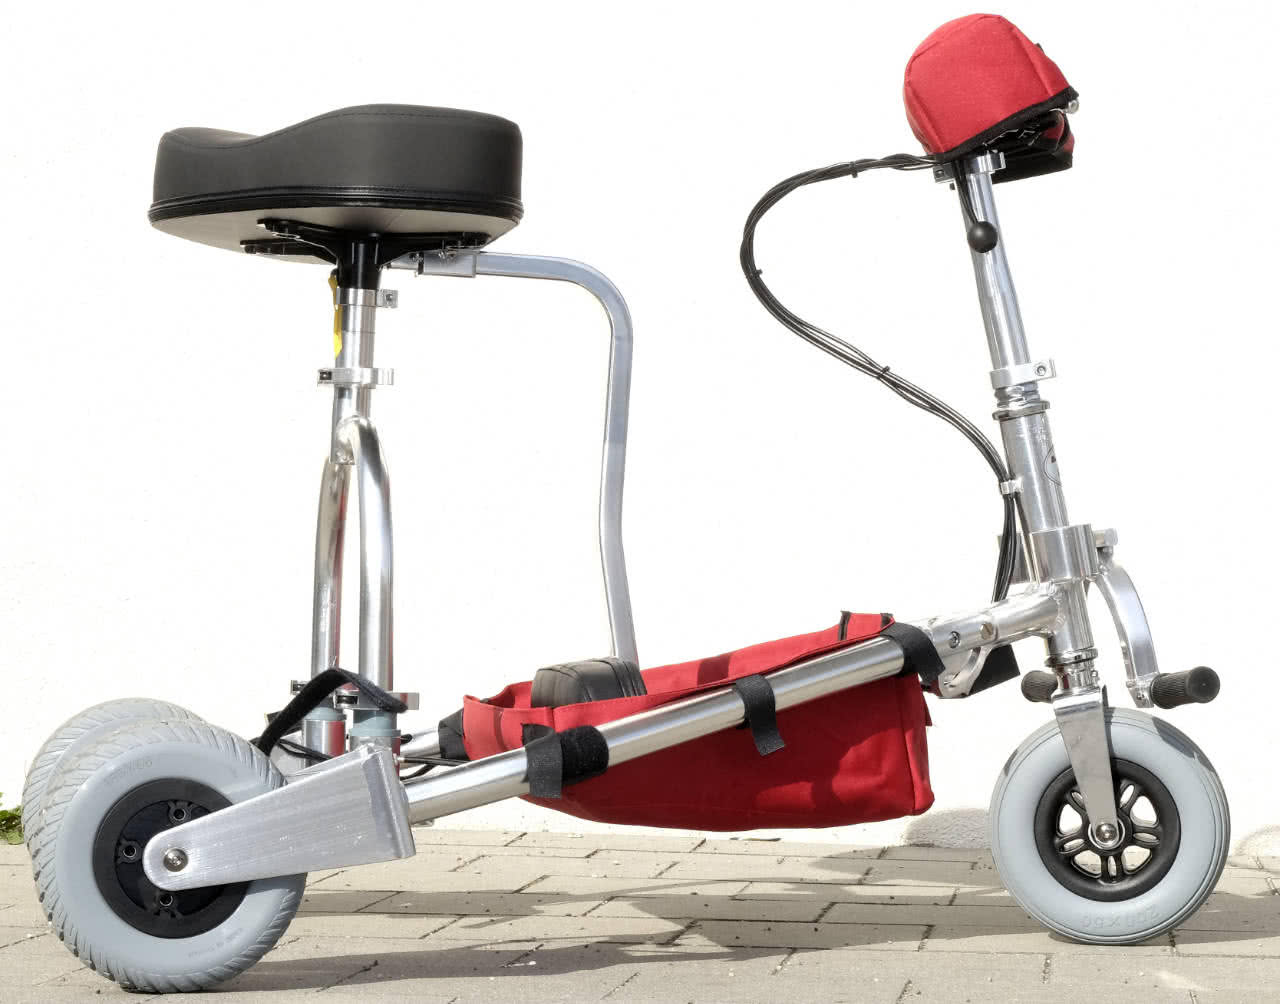 Replace the seat of the travelScoot and close the clamp